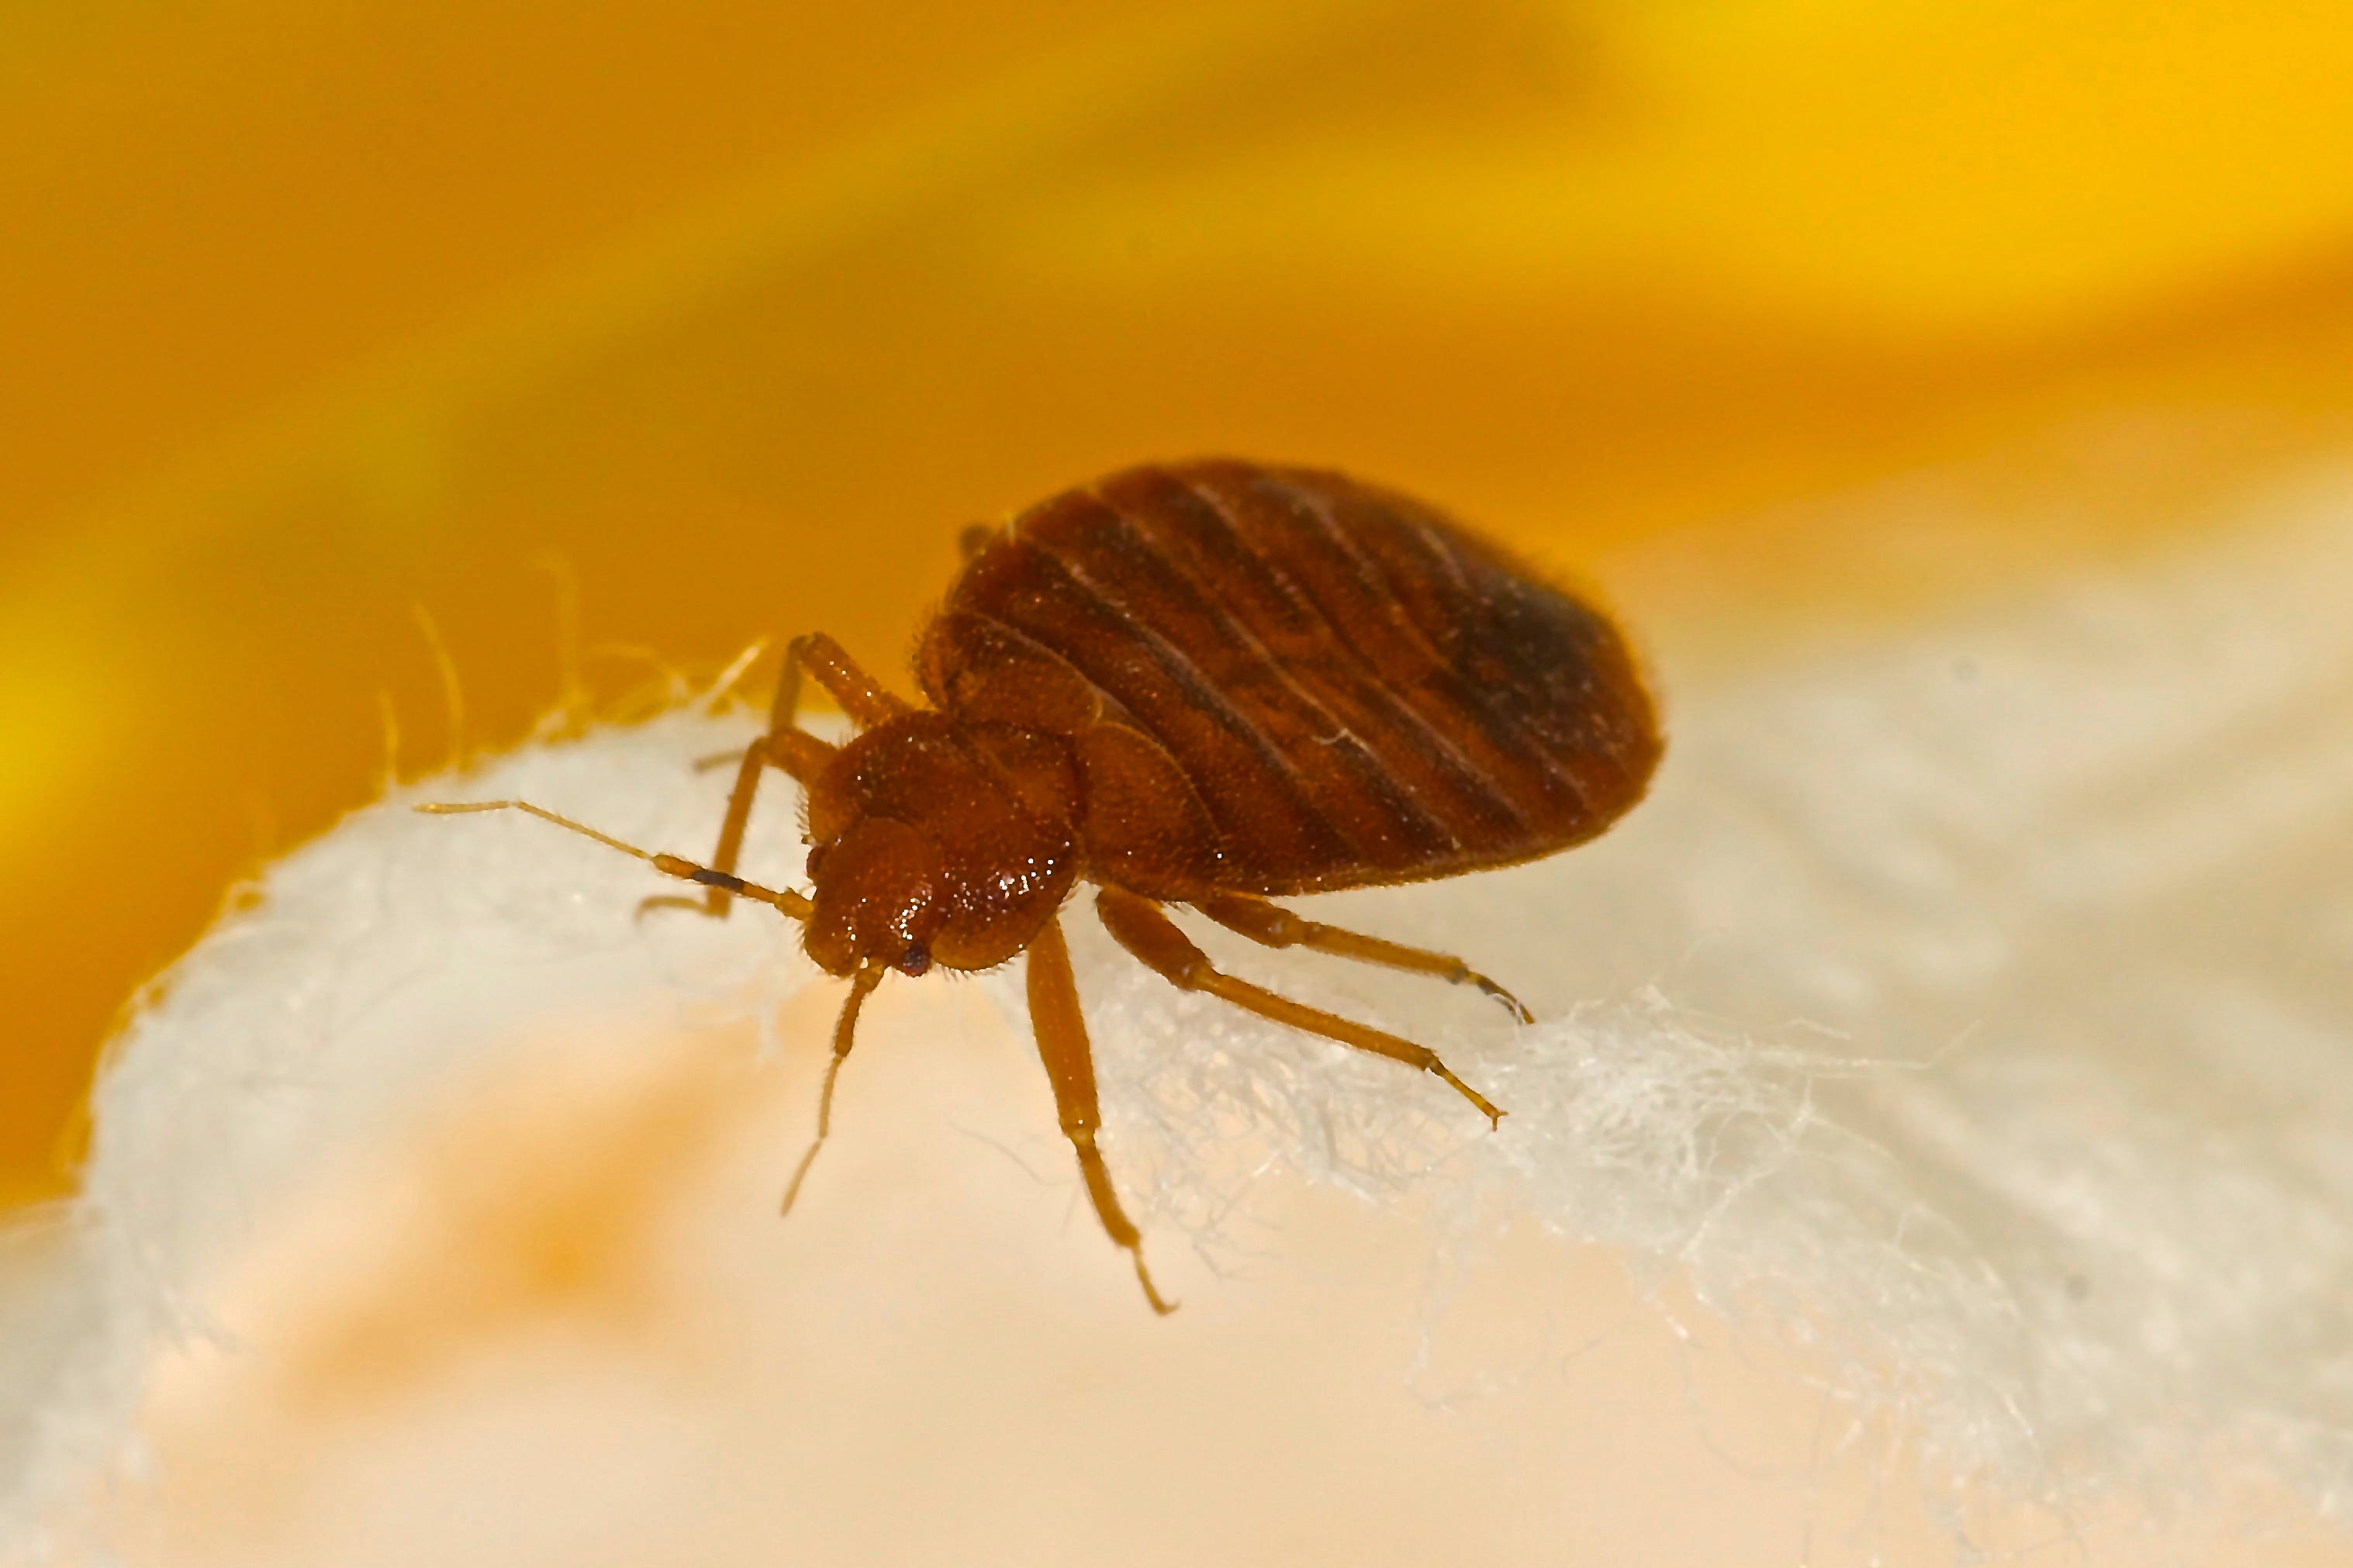 Bedbugs ... at the office? Pests found at Gates Maximus location